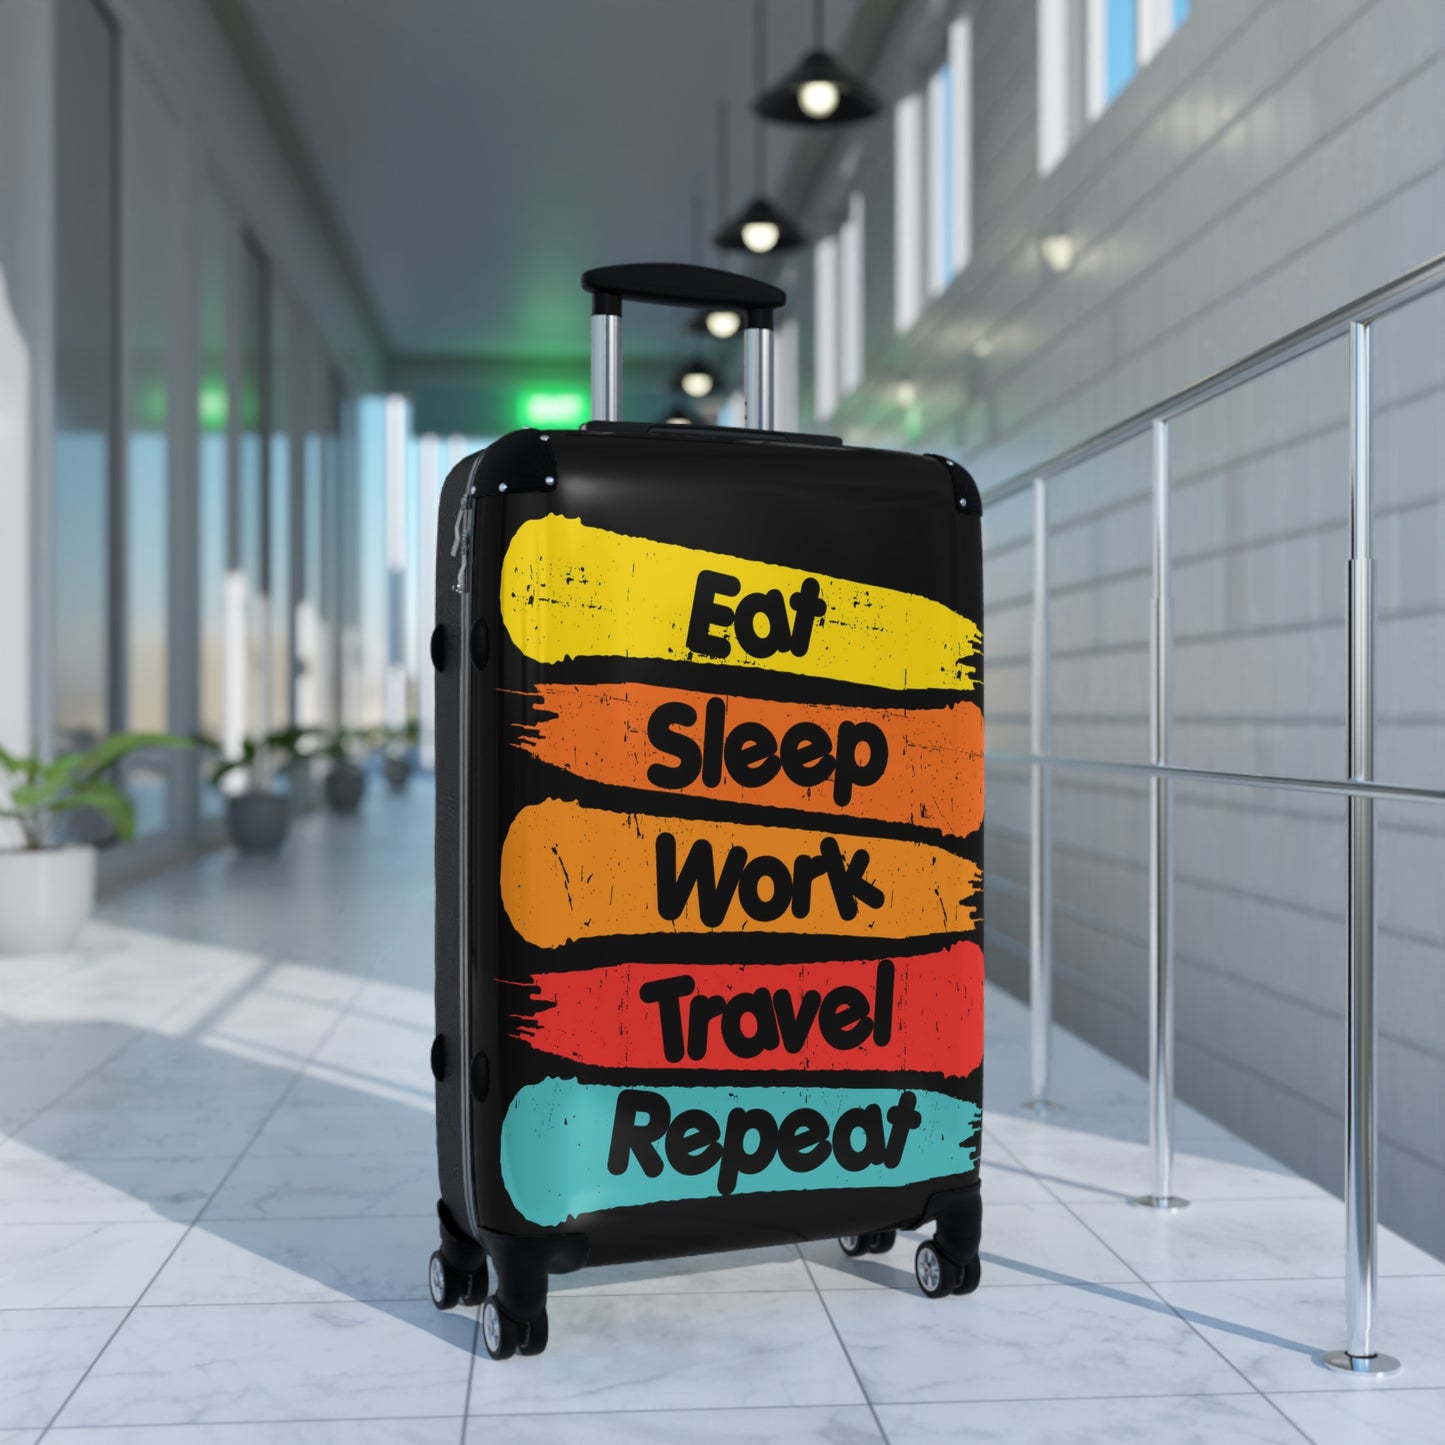 Suitcase: Your Ultimate Travel Companion in Style (EAT, SLEEP, WORK, TRAVEL, REPEAT)